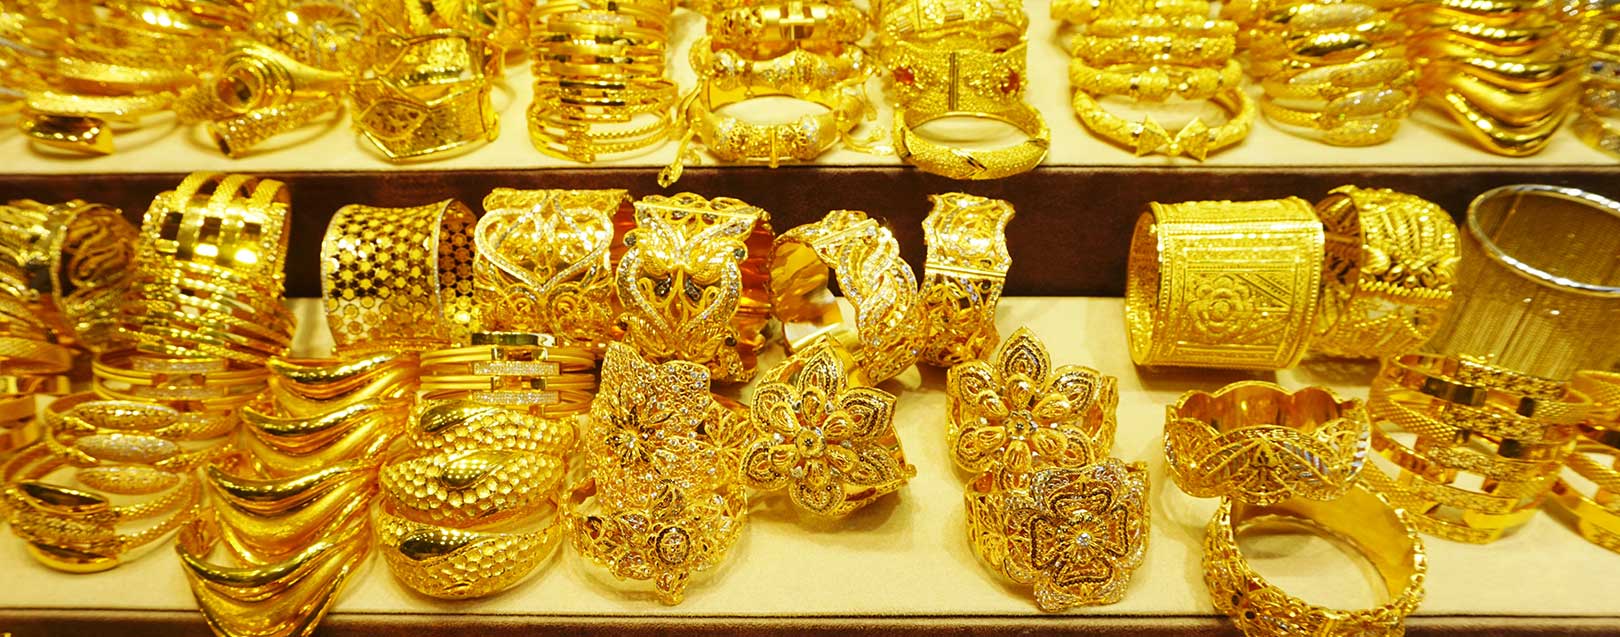 Gold crosses Rs.31,000 mark after 29 months